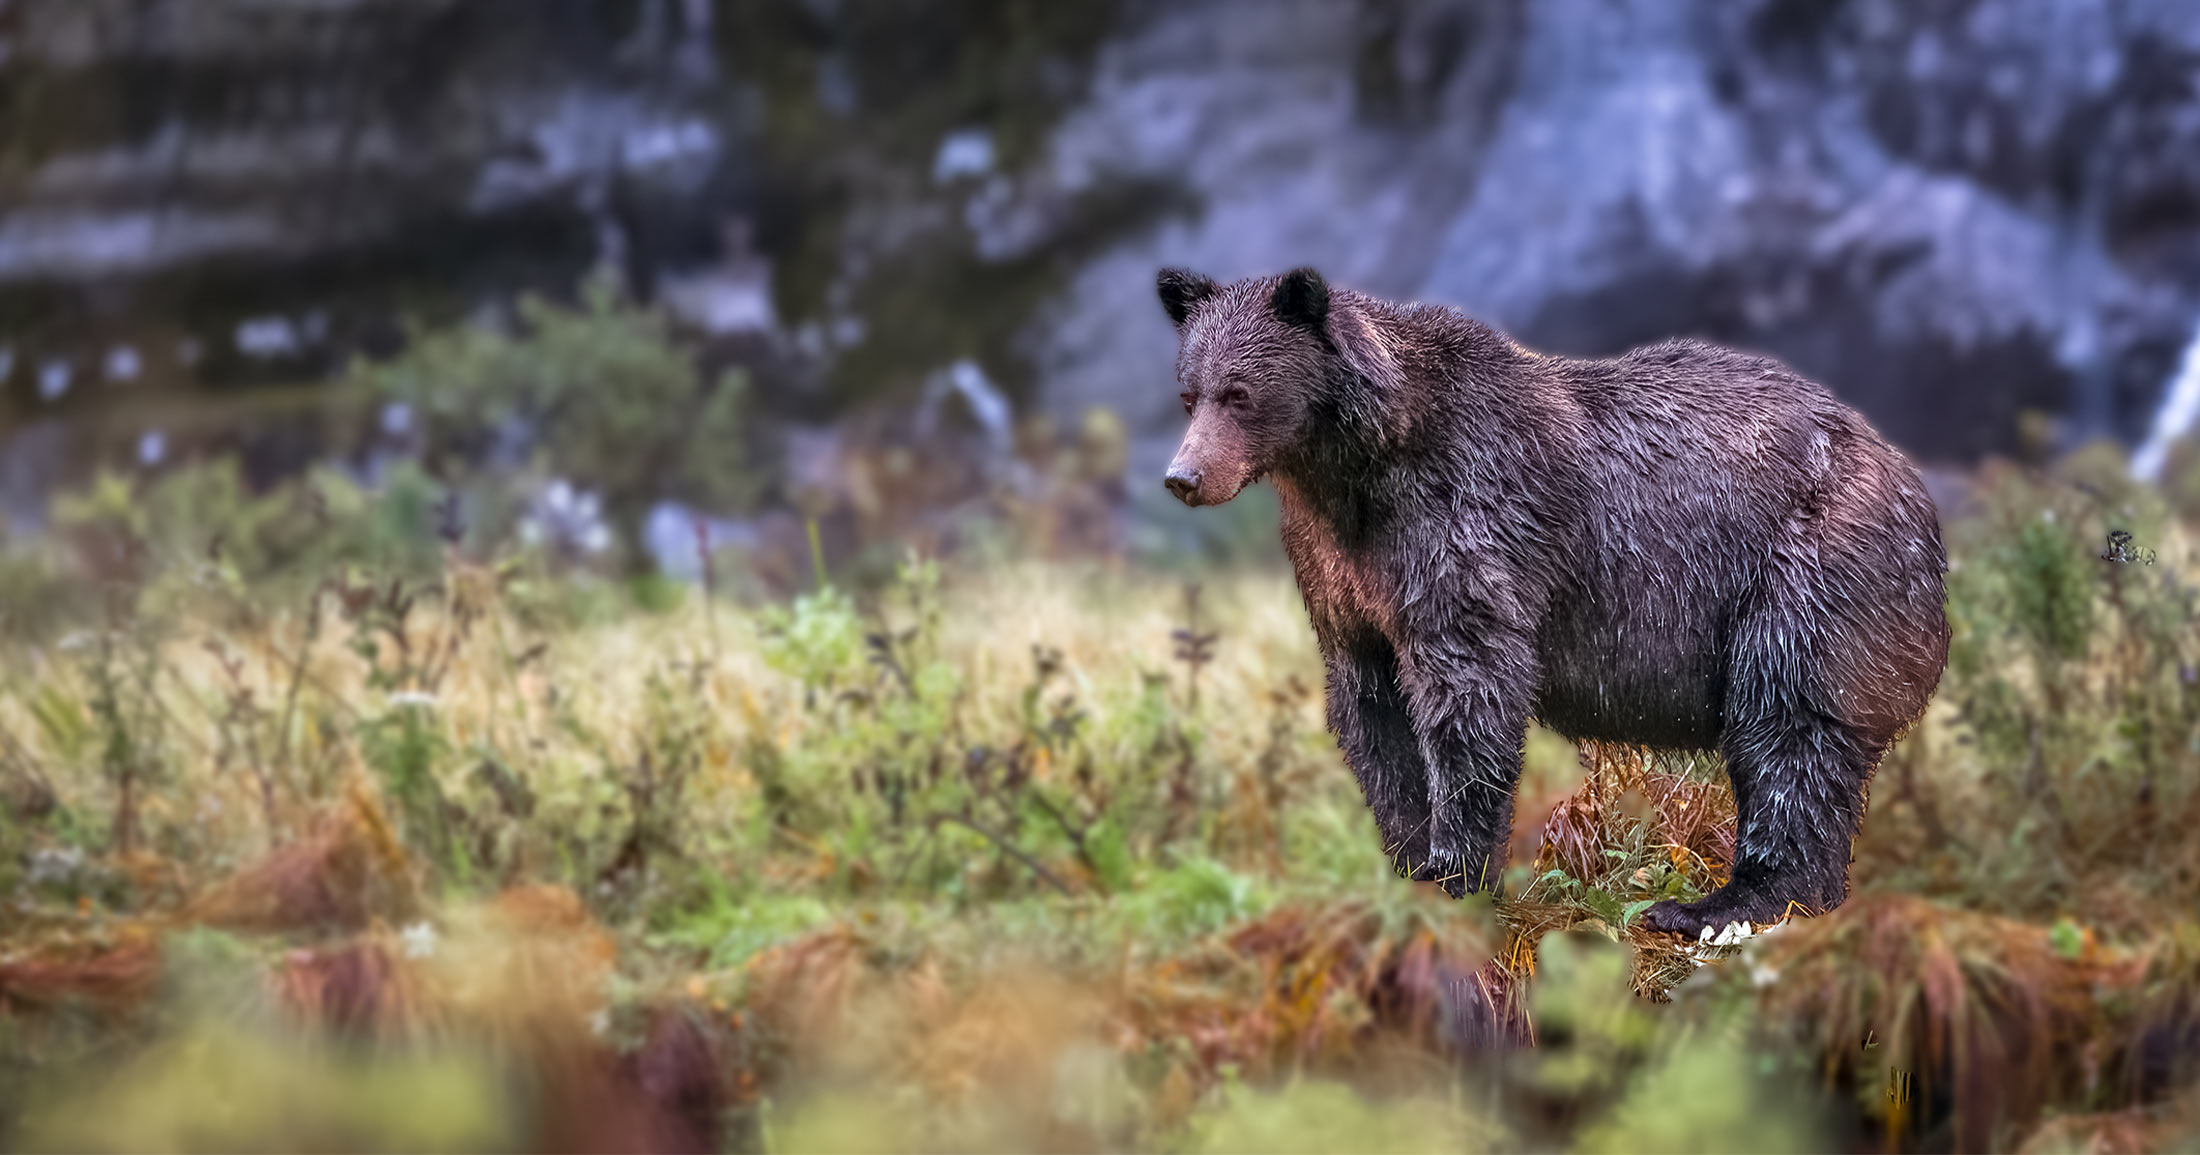 Grizzly bear on the bank of a river.